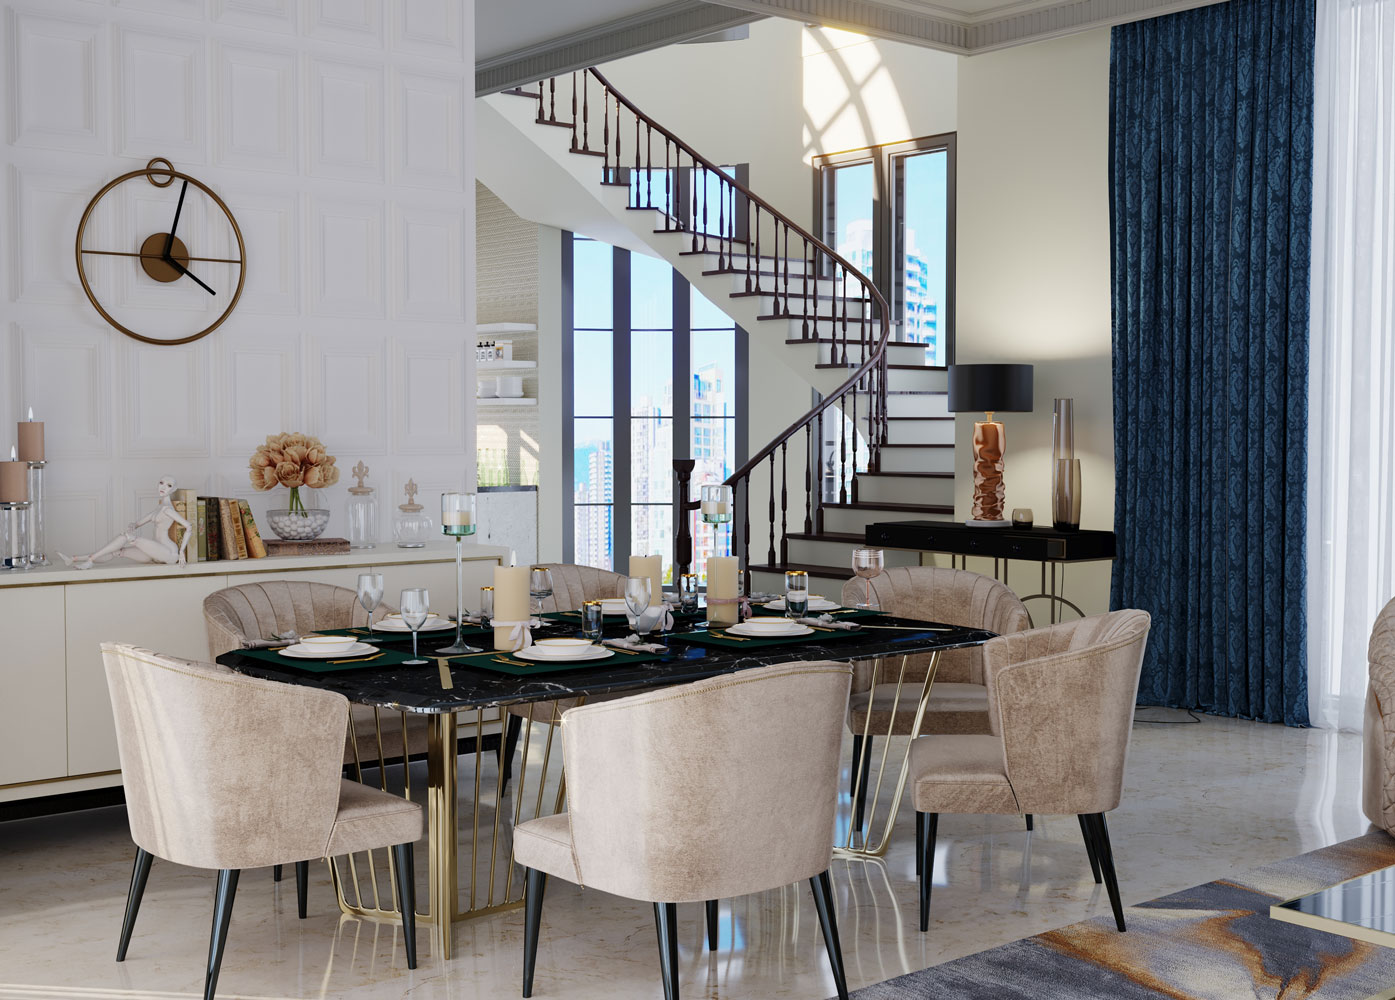 Dining table - Archviztech Interior 3d Rendering and Visualization, Vancouver